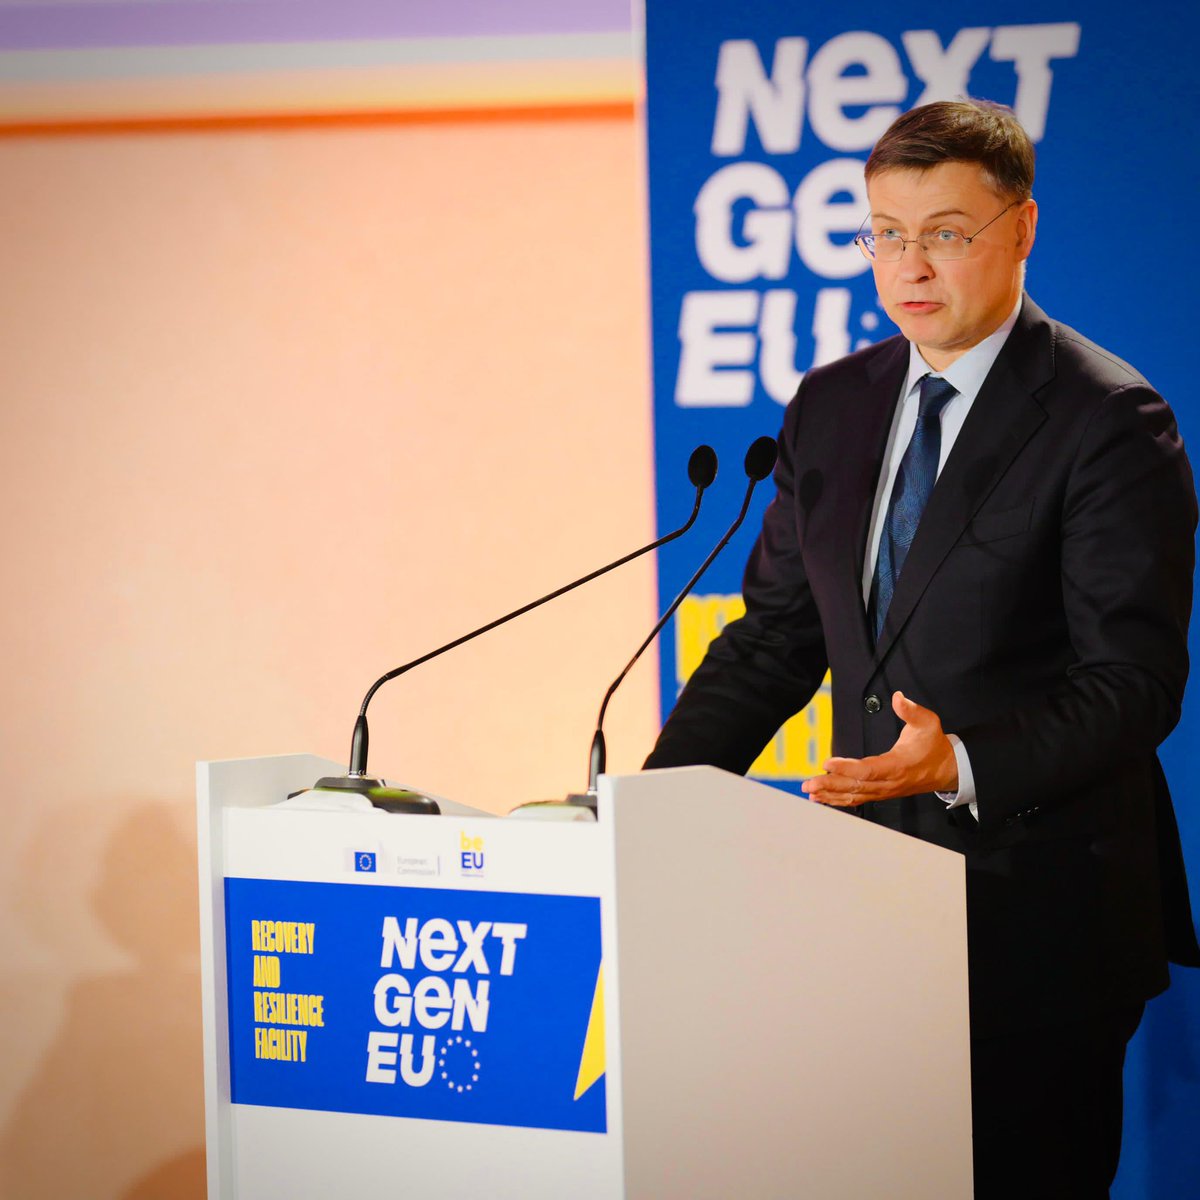 #NextGenerationEU is a real first. It’s steered the 🇪🇺 through several crises, from the pandemic to high energy prices.

The reforms & investments under the #RRF are leading to positive change on the ground.

We now need to press ahead with implementation by end-2026.  1/2